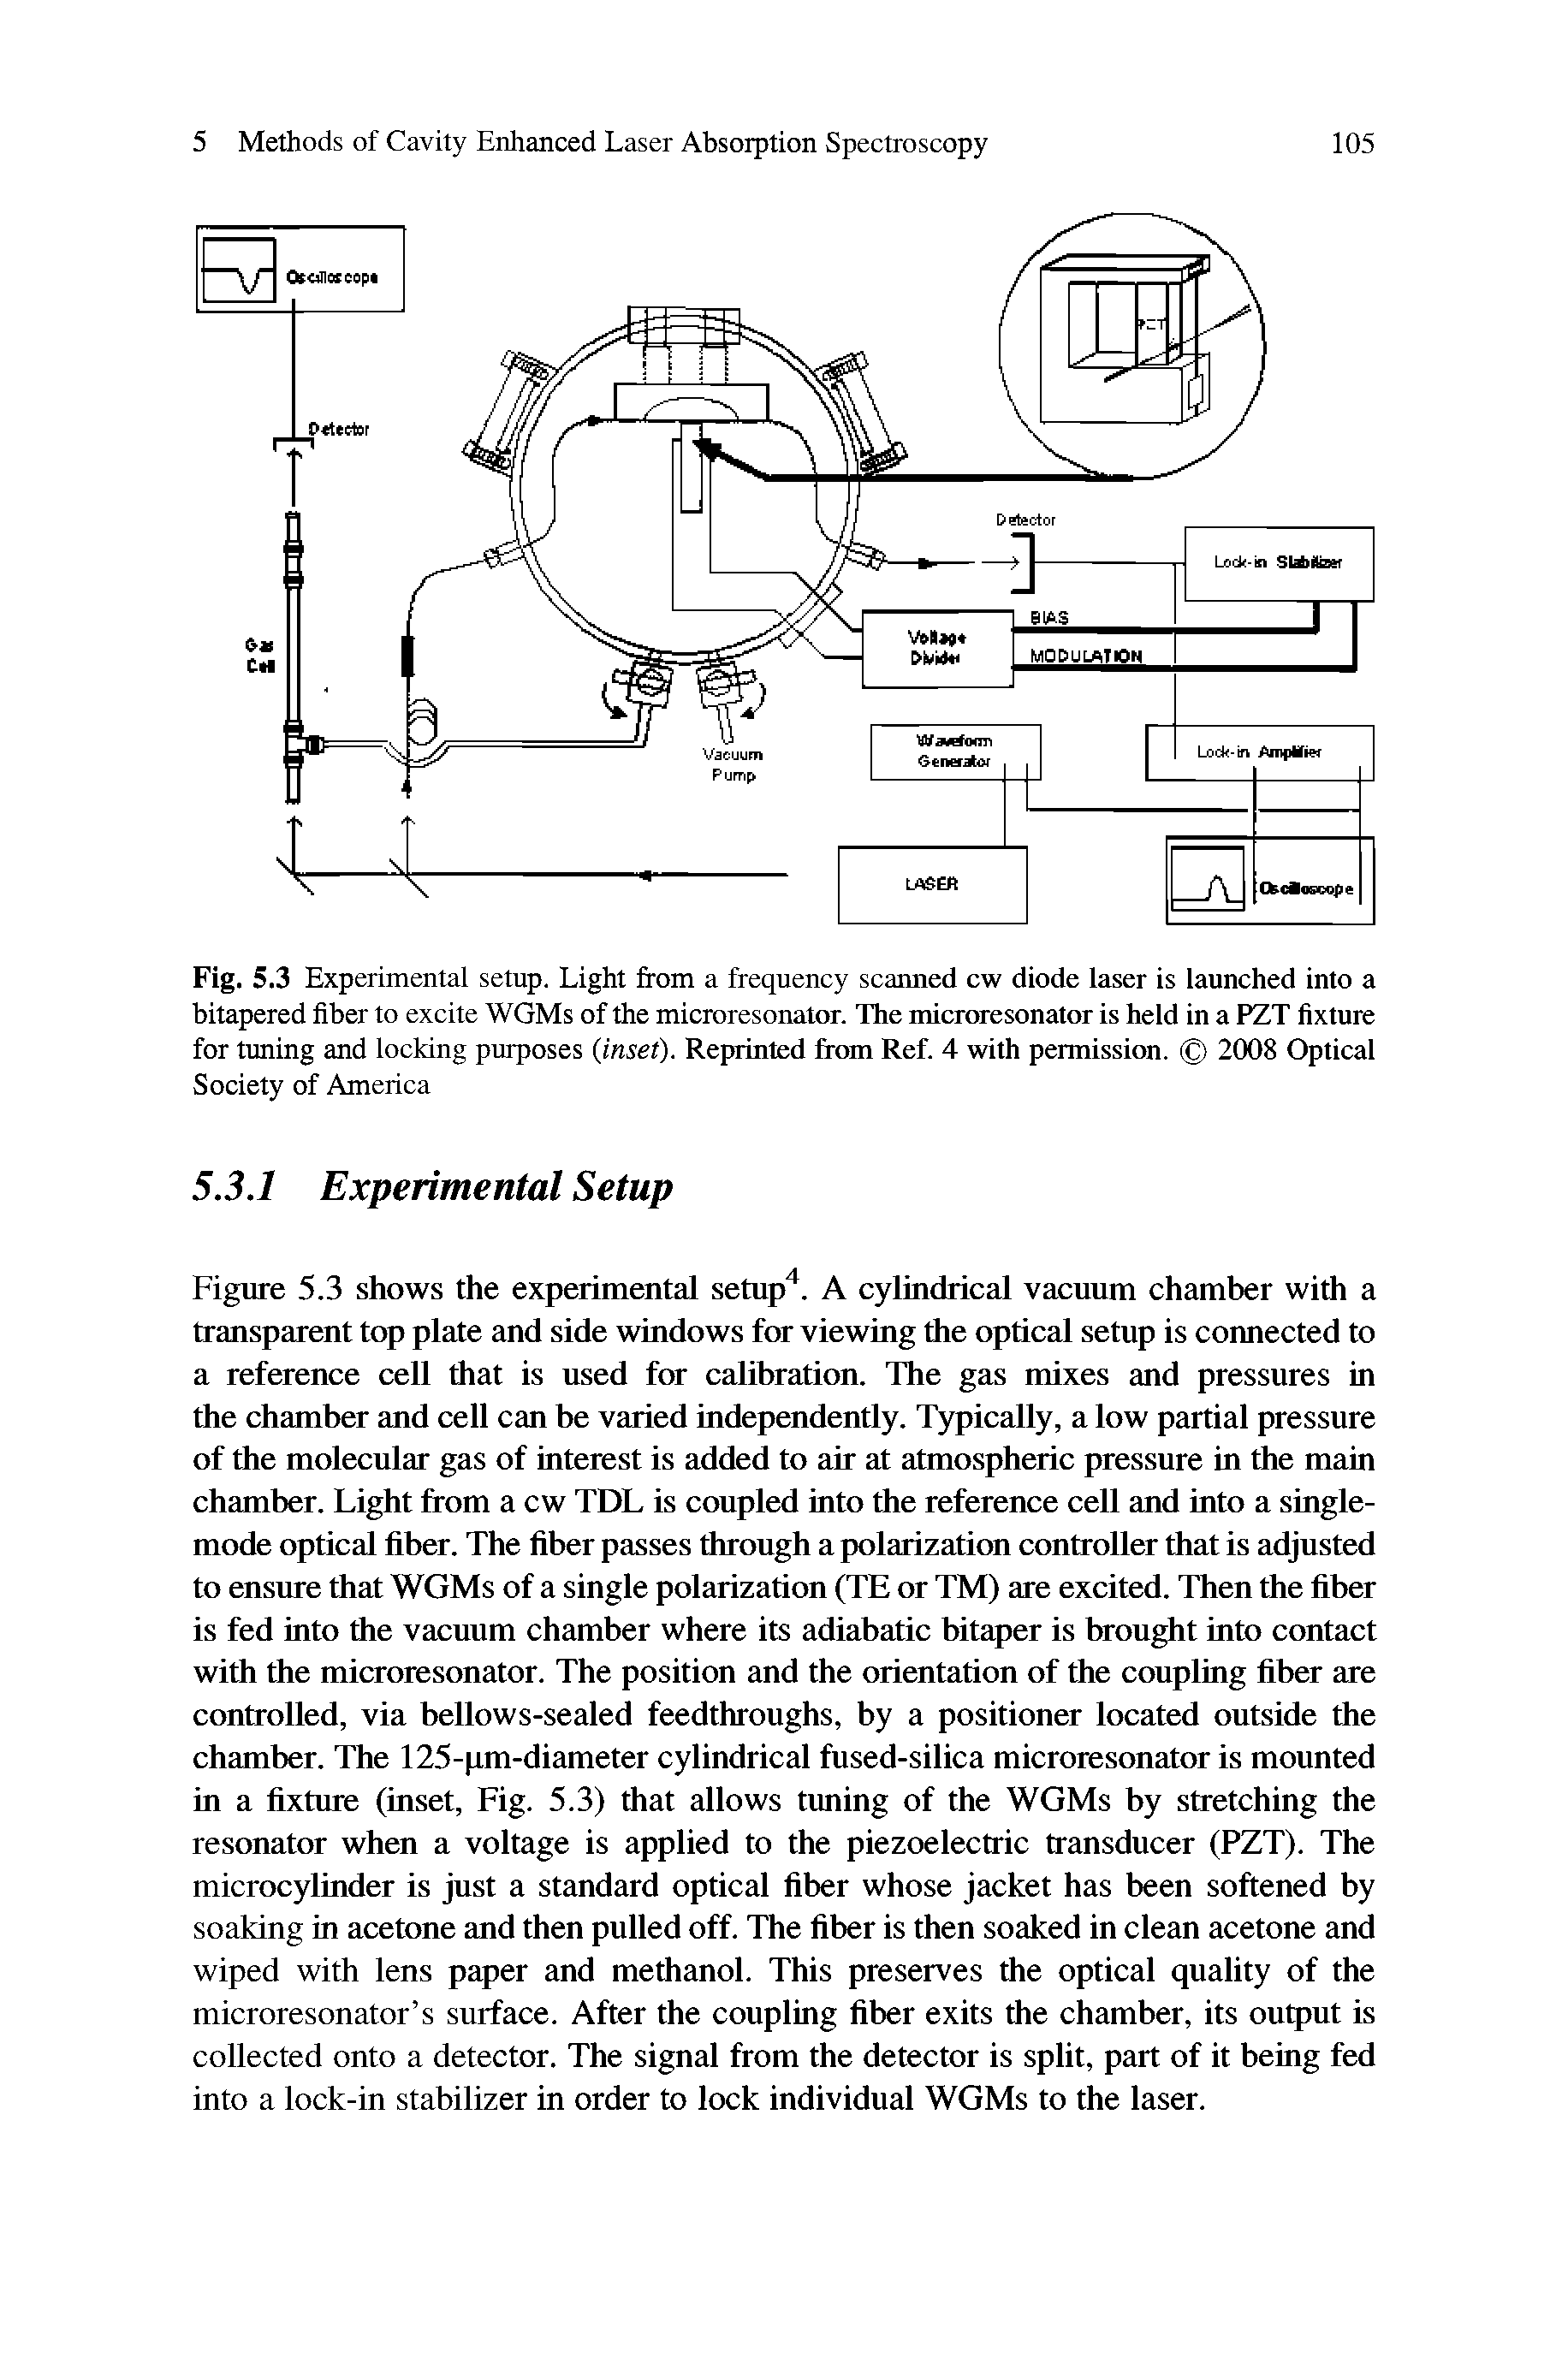 Fig. 5.3 Experimental setup. Light from a frequency scanned cw diode laser is launched into a bitapered fiber to excite WGMs of the microresonator. The microresonator is held in a PZT fixture for tuning and locking purposes inset). Reprinted from Ref. 4 with permission. 2008 Optical Society of America...